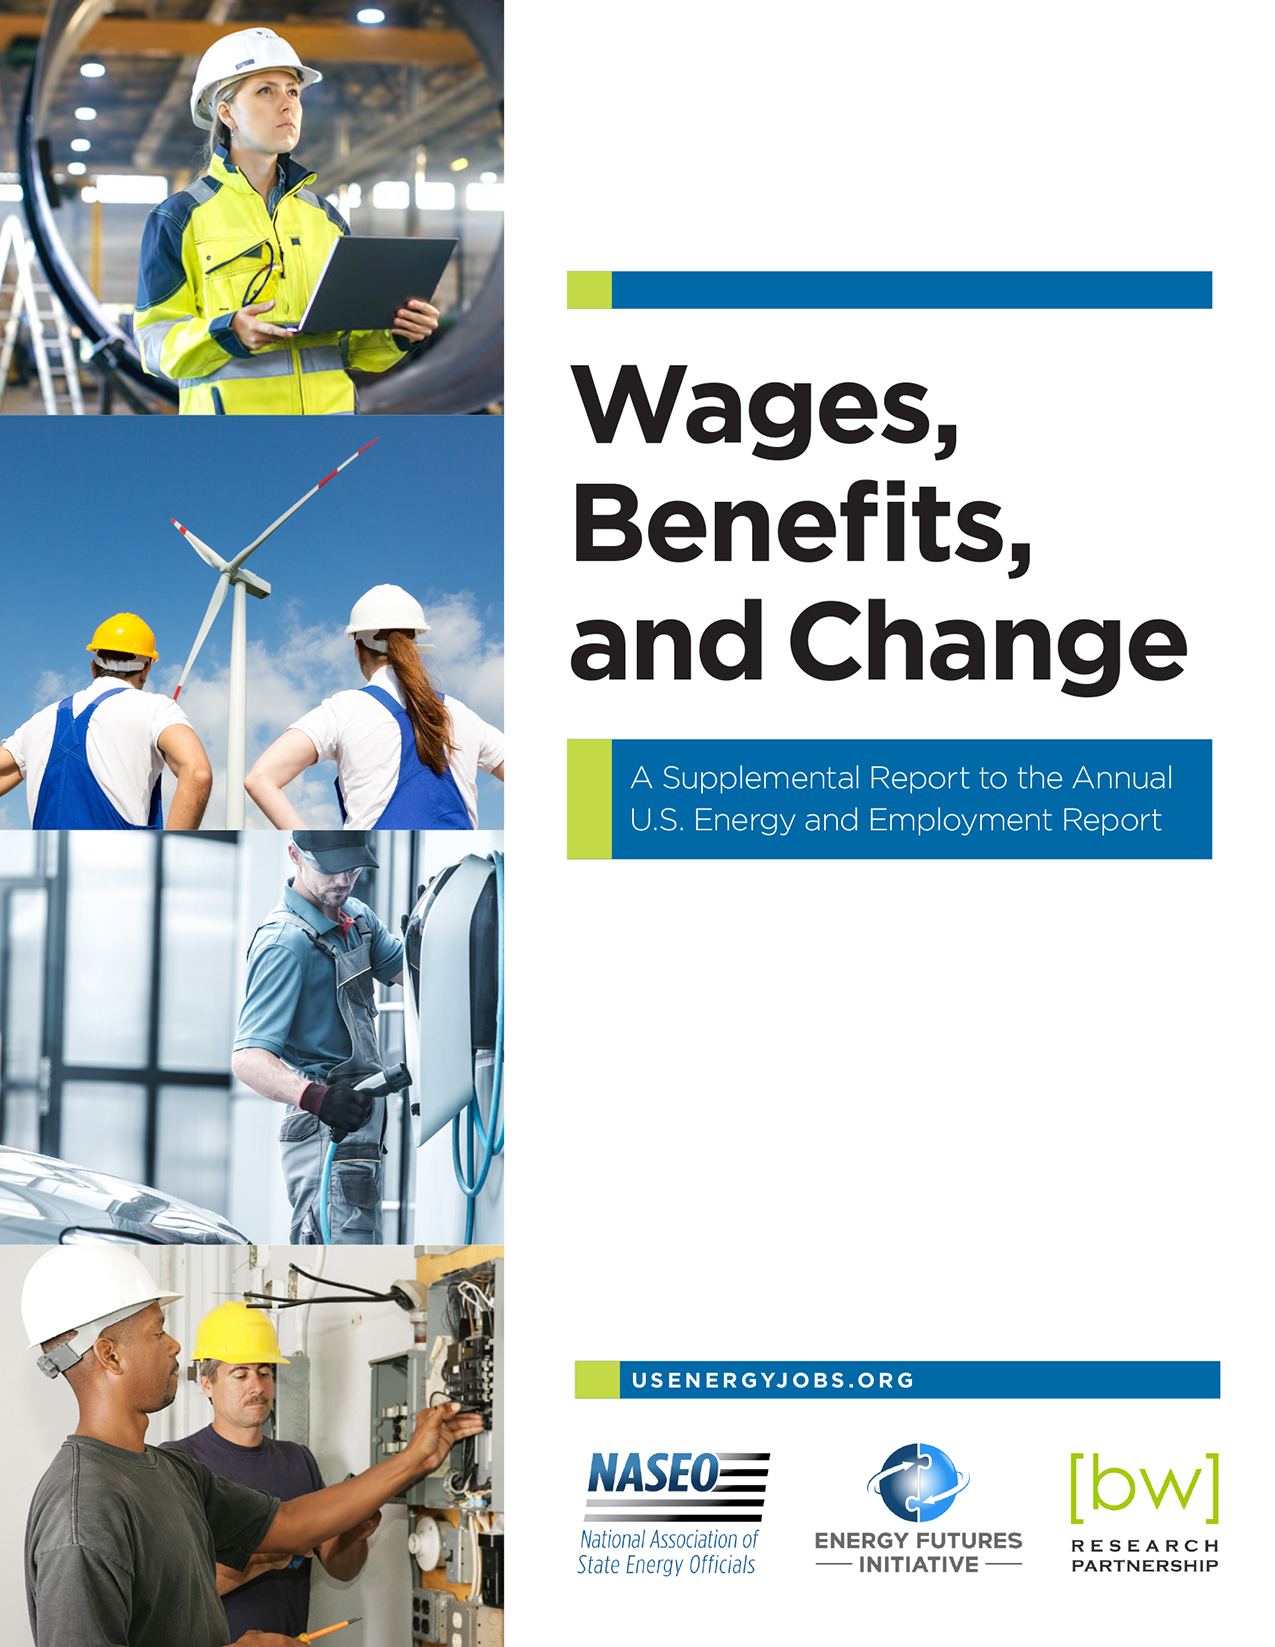 Cover Image - Wages, Benefits, and Change: A Supplemental Report to the Annual U.S. Energy and Employment Report